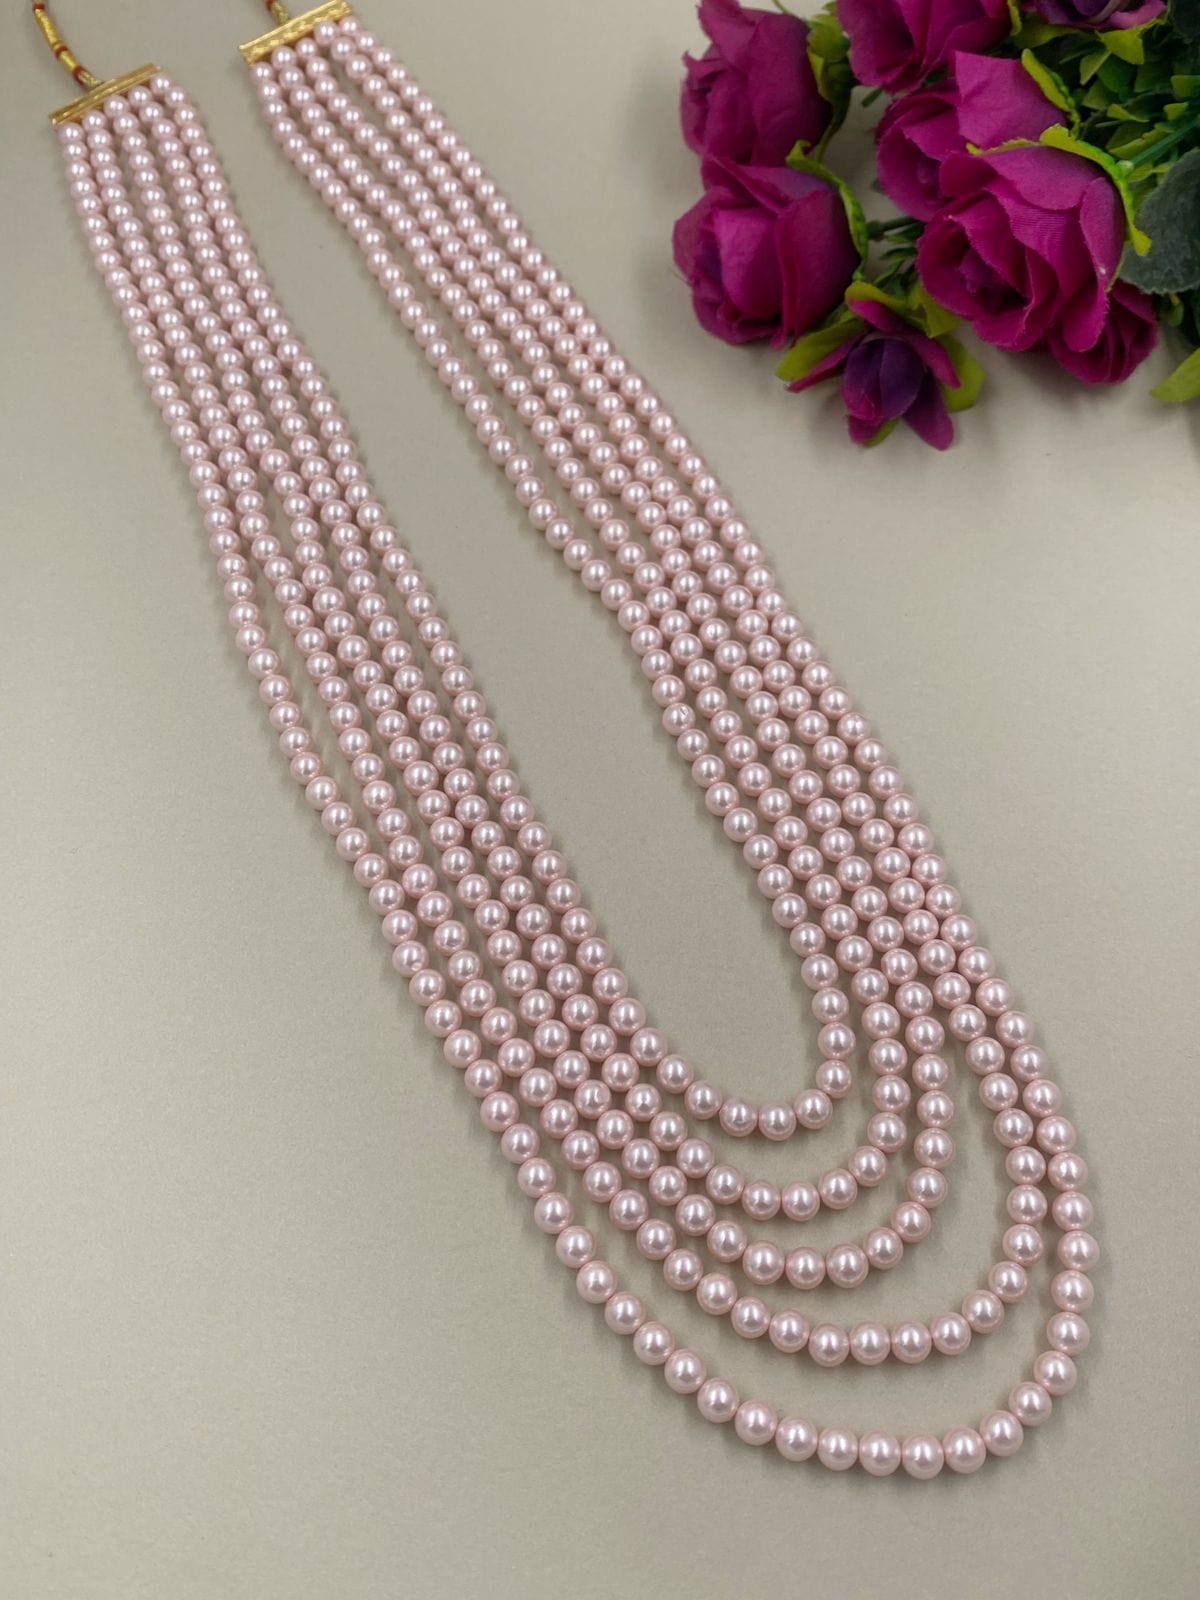 Multilayered Rose Pink Shell Pearls Sherwani Mala Necklace For Grooms By Gehna Shop Beads Jewellery